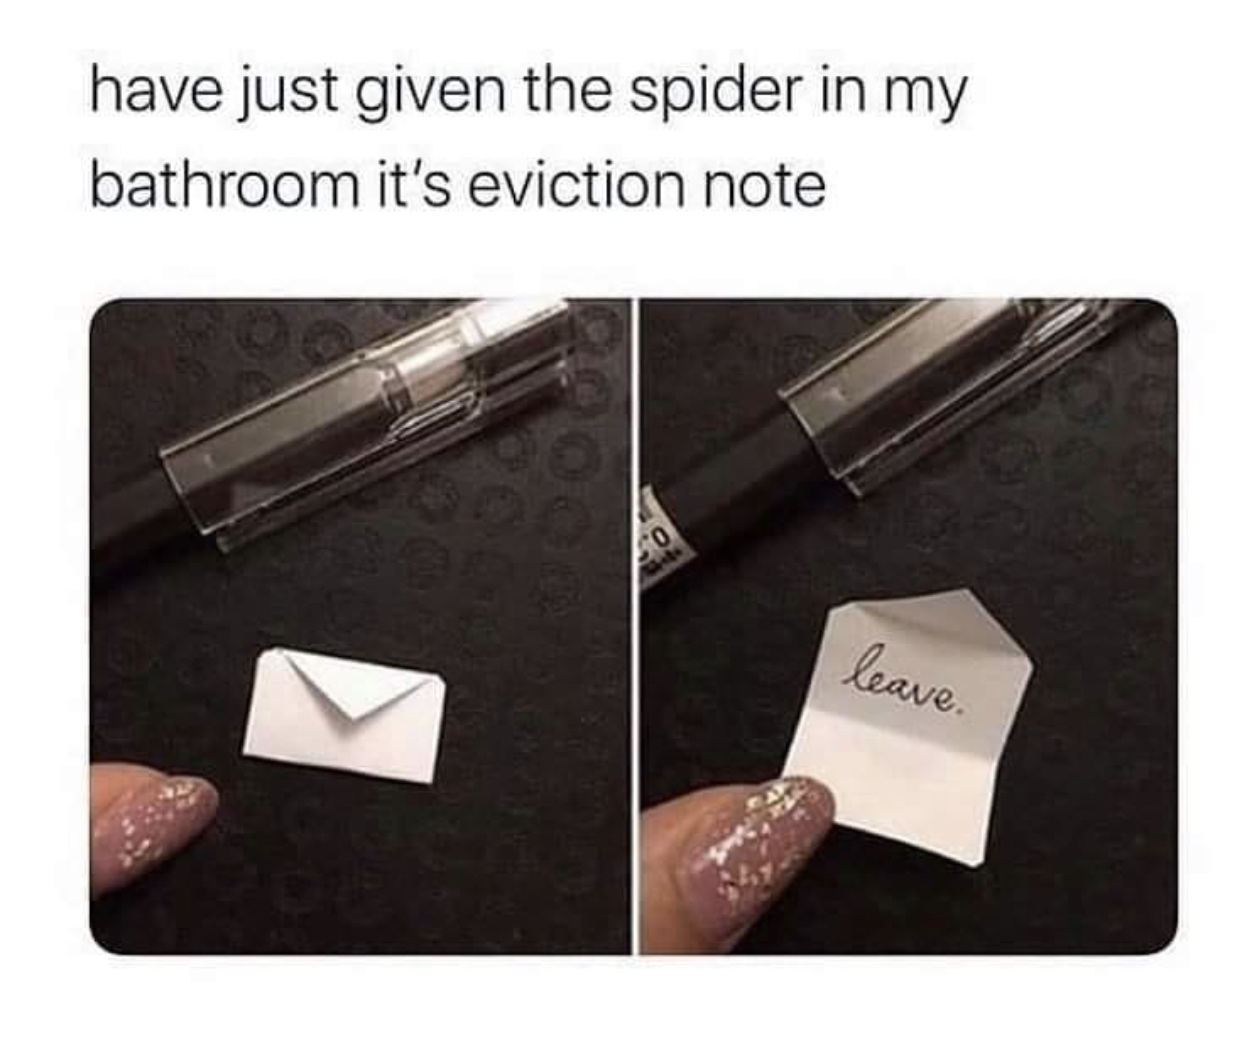 eviction notice for a spider - have just given the spider in my bathroom it's eviction note leave.